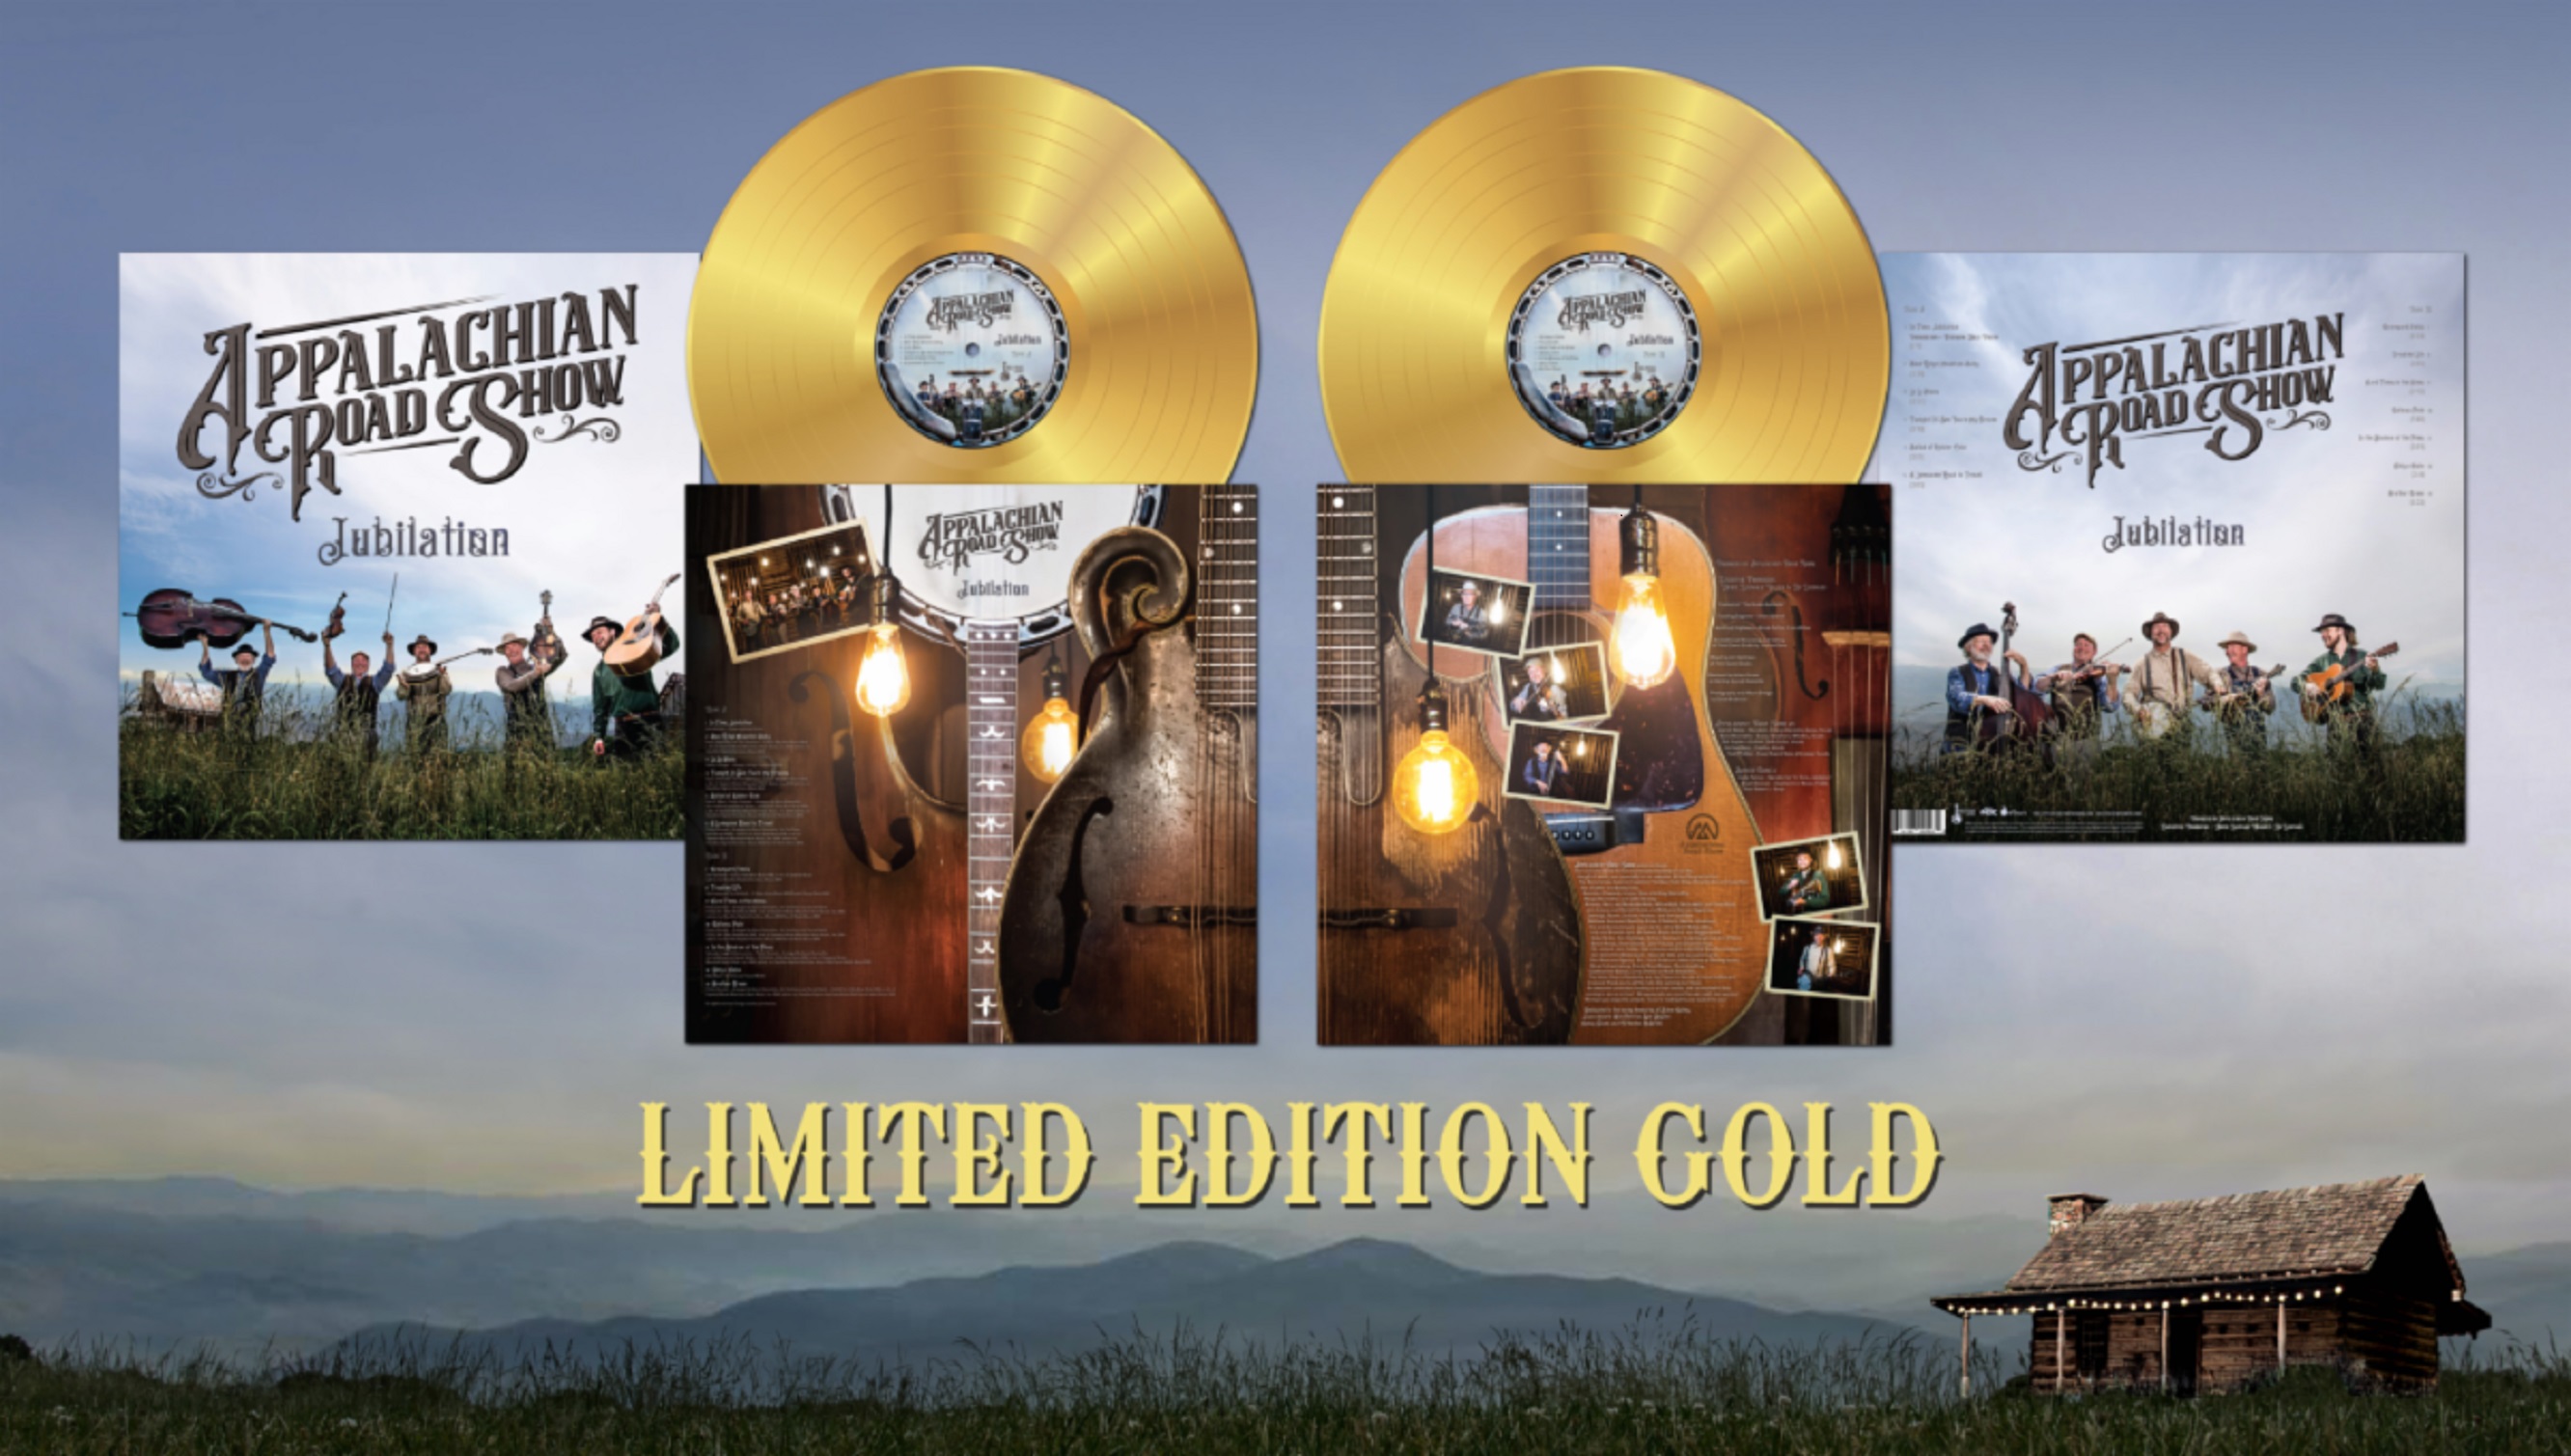 “roots supergroup" shares limited edition gold vinyl ahead of Opry debut